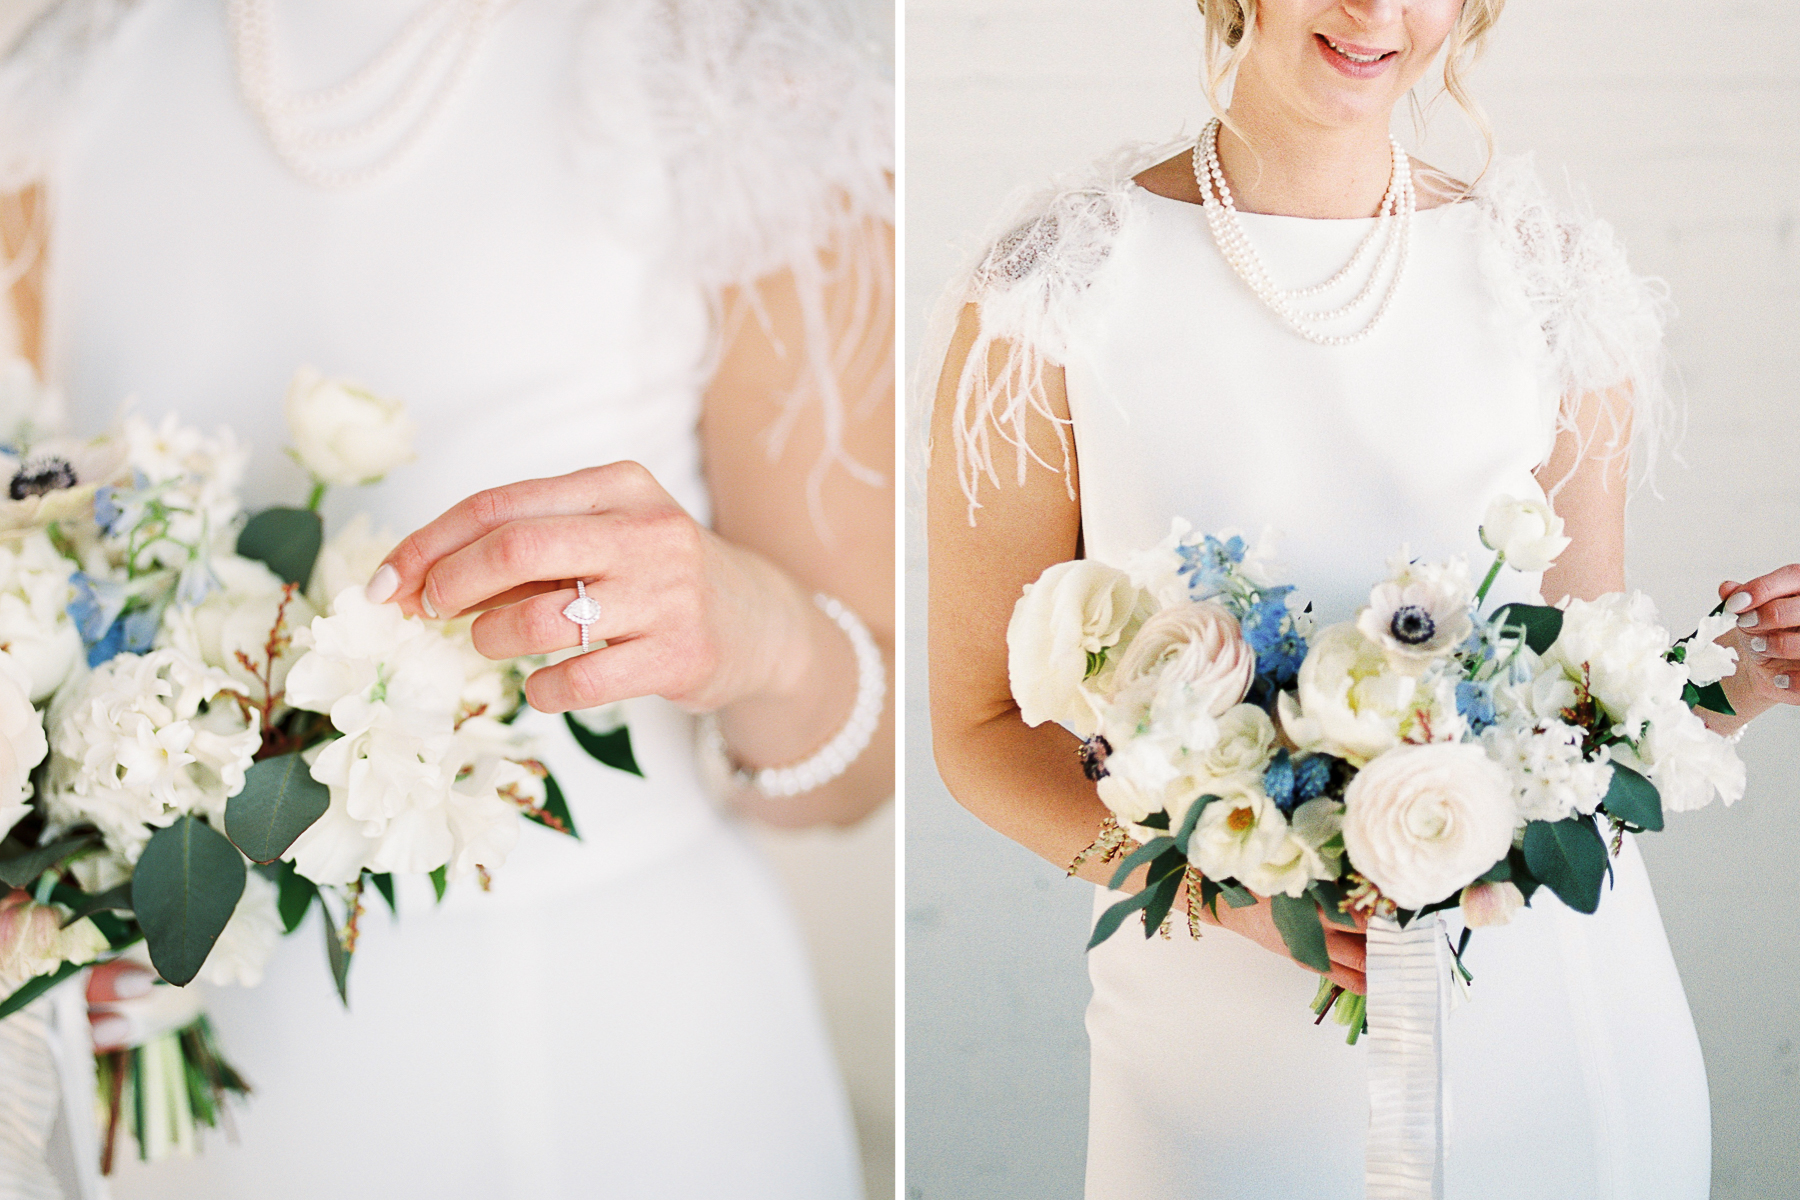 Best Bridal Bouquets designed by Kyla Ferguson | Photographed by Esther Funk Photography | blush and white wedding bouquet | blush and blue colour palette | Peonies Ranunculus Muscari Hyacinth | Flower Trends | spring wedding bouquet | Winnipeg Wedding Photographer | Fine Art Wedding Photographer | Fine Art Wedding Photographer Esther Funk #weddingbouquet #bestbridalbouquets #estherfunkphotography #winnipegweddingphotographer